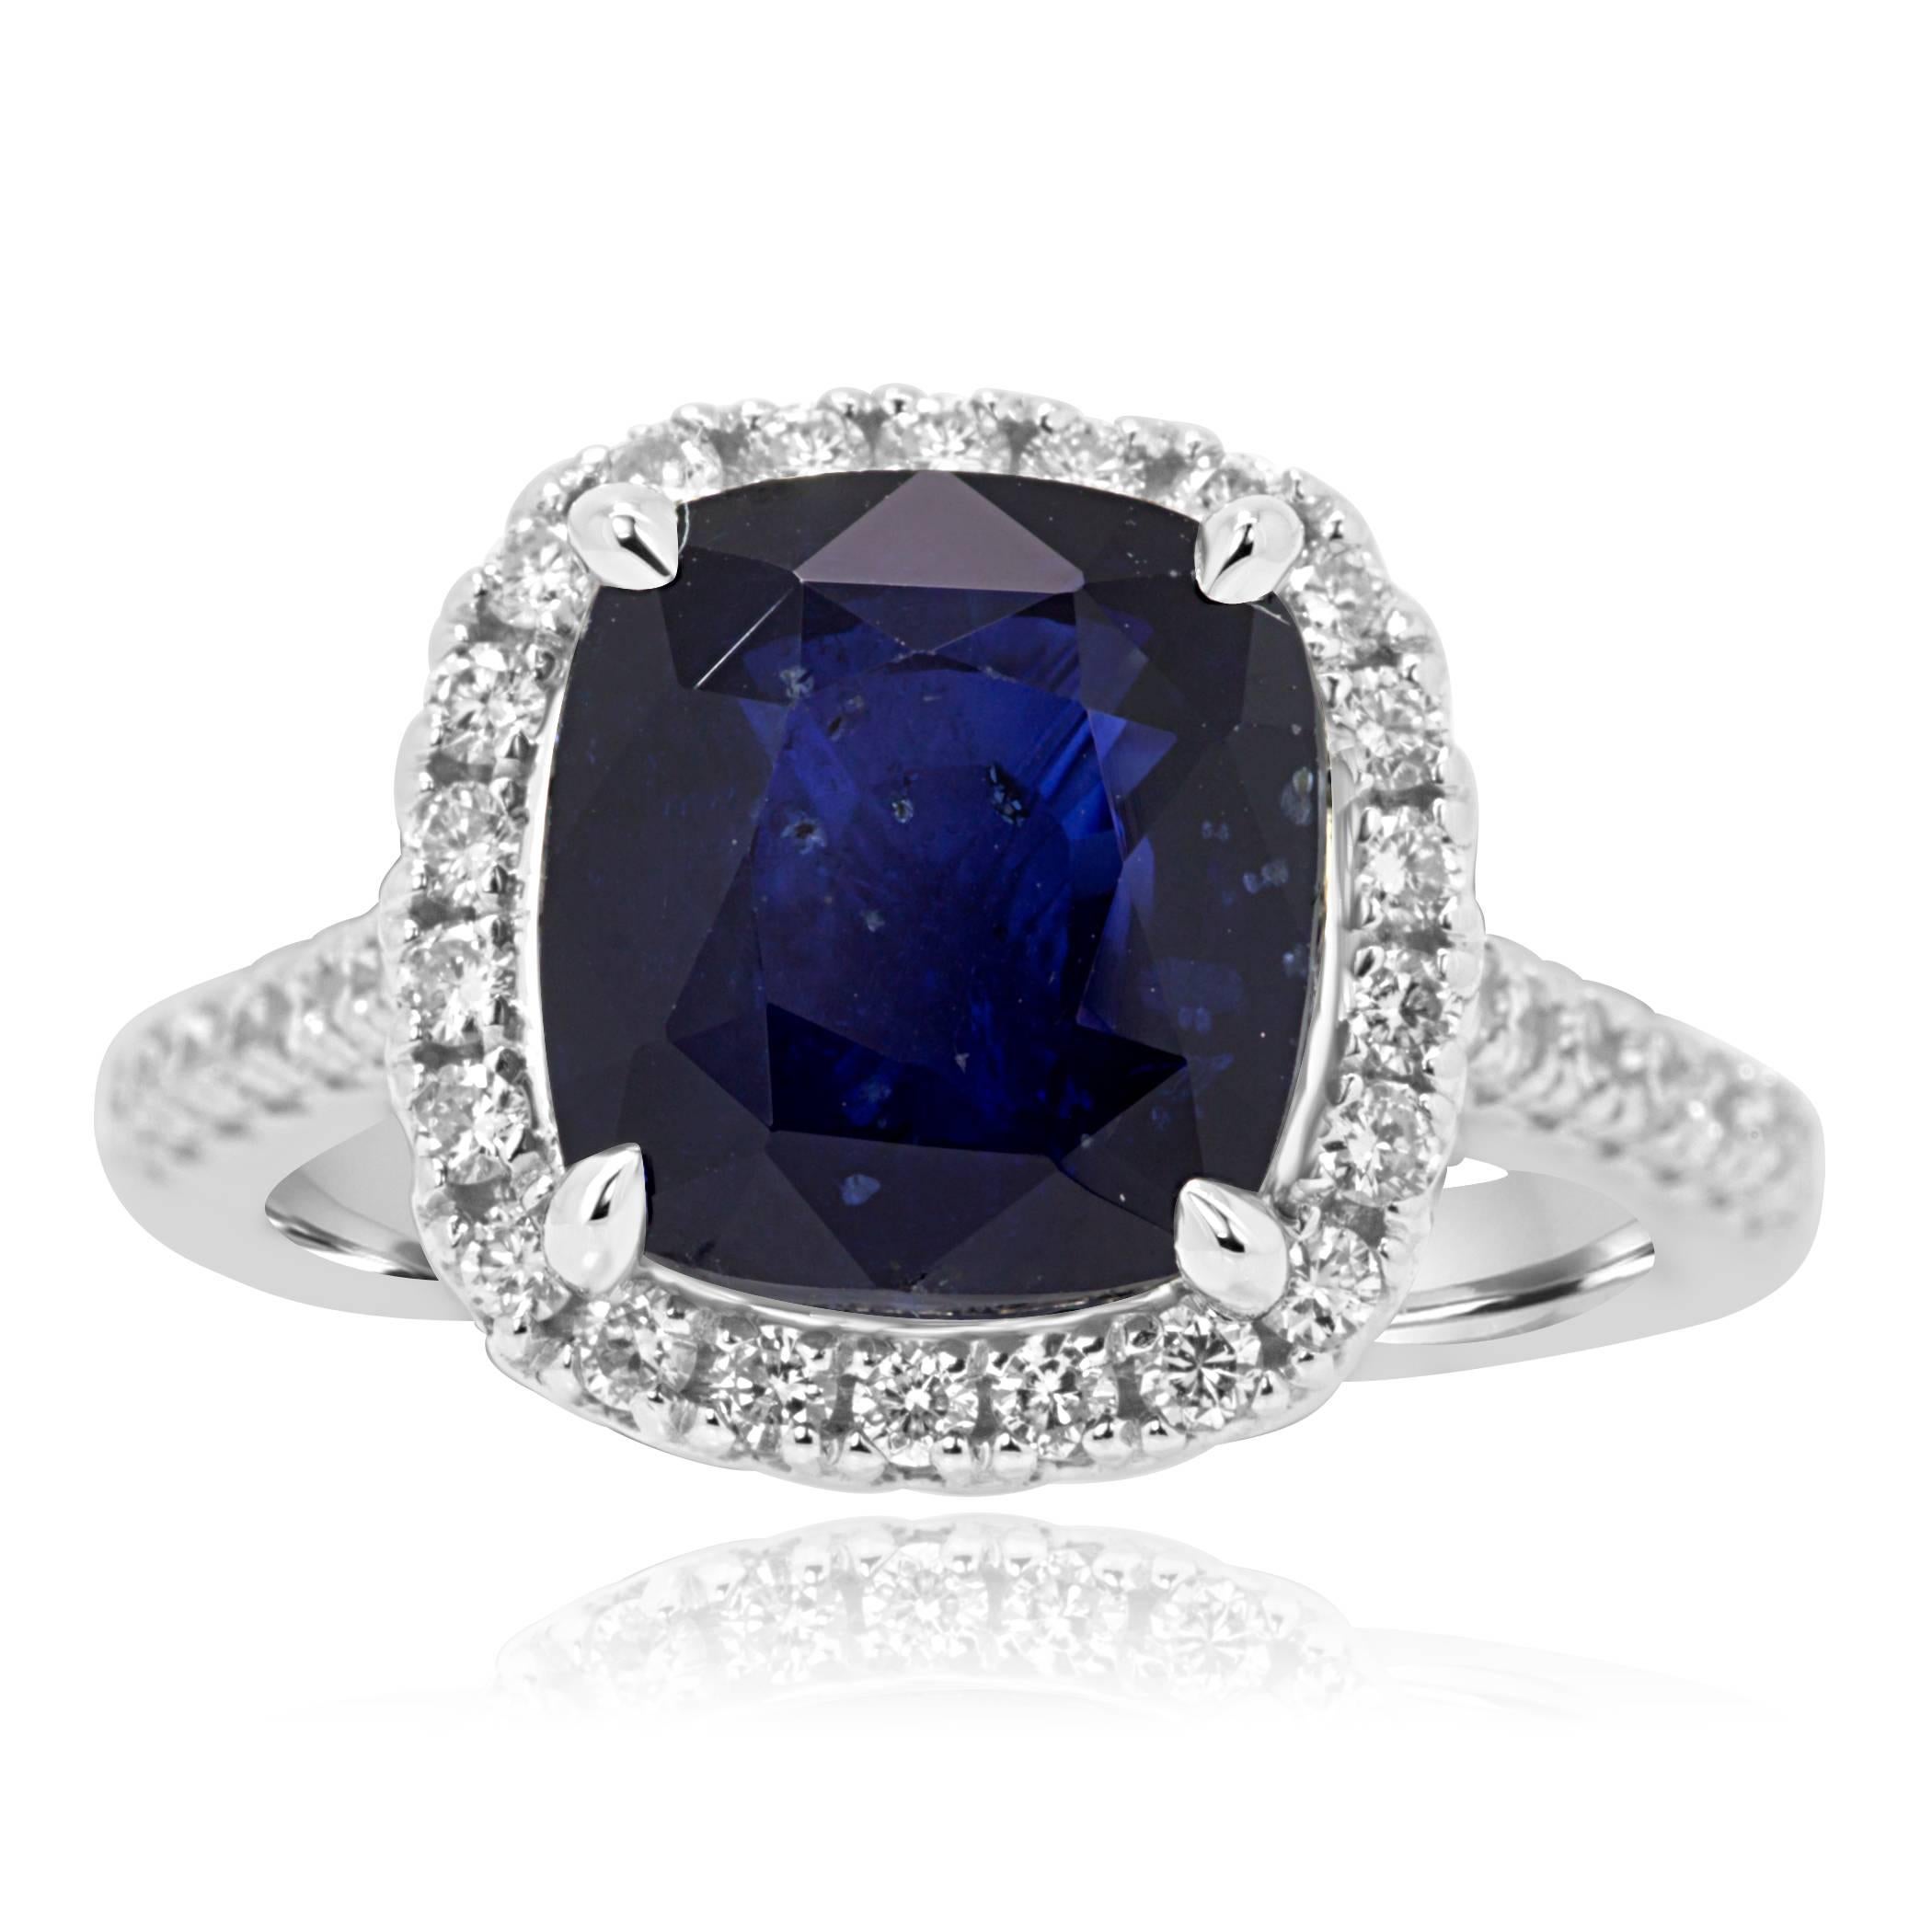 Stunning GIA Certified Cushion Blue Sapphire 6.62 Carat encircled in a single Halo of Colorless Round Diamonds VS-SI clarity 0.54 Carat in 14K White Gold Bridal Fashion Ring.

Style available in different price ranges. Prices are based on your